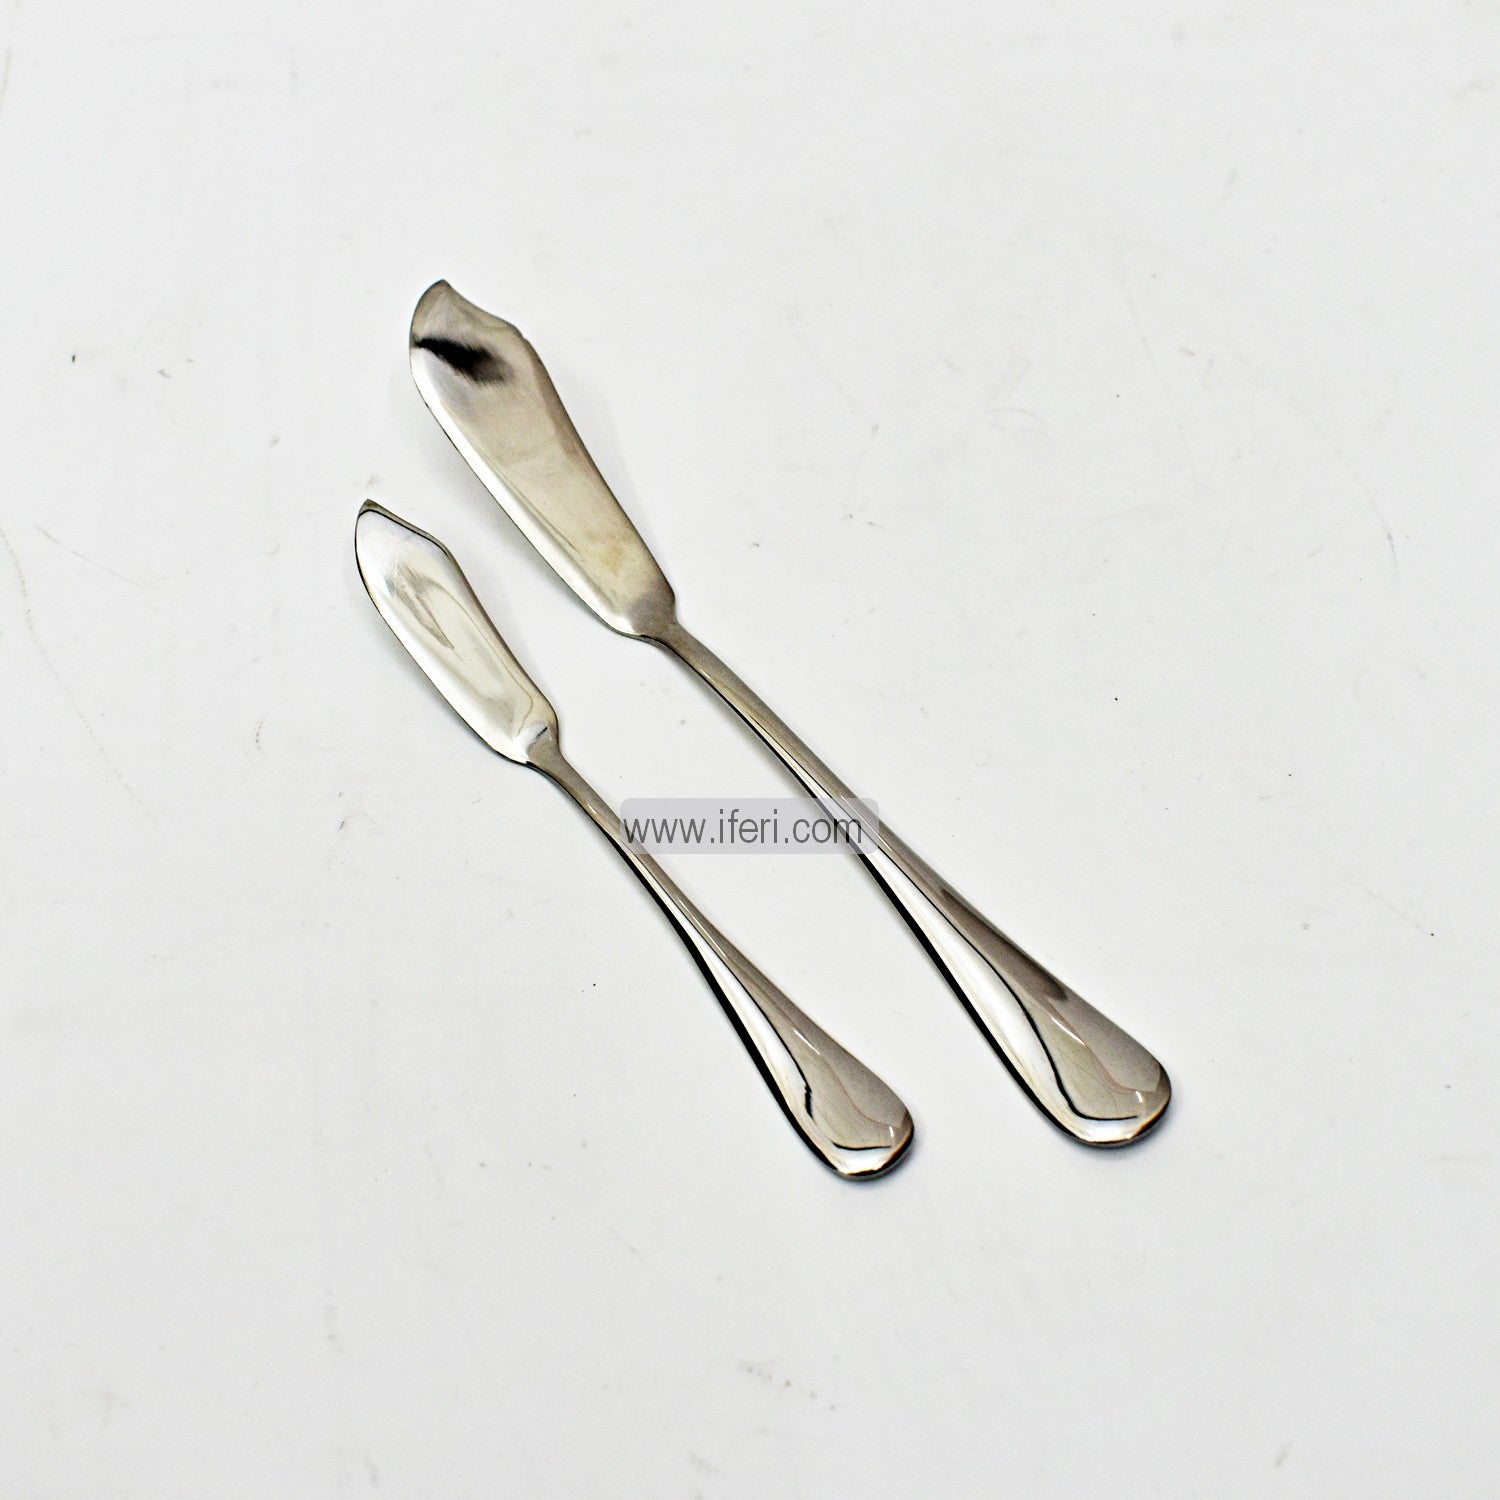 2 pcs Stainless Steel Butter Knife Set TB0627